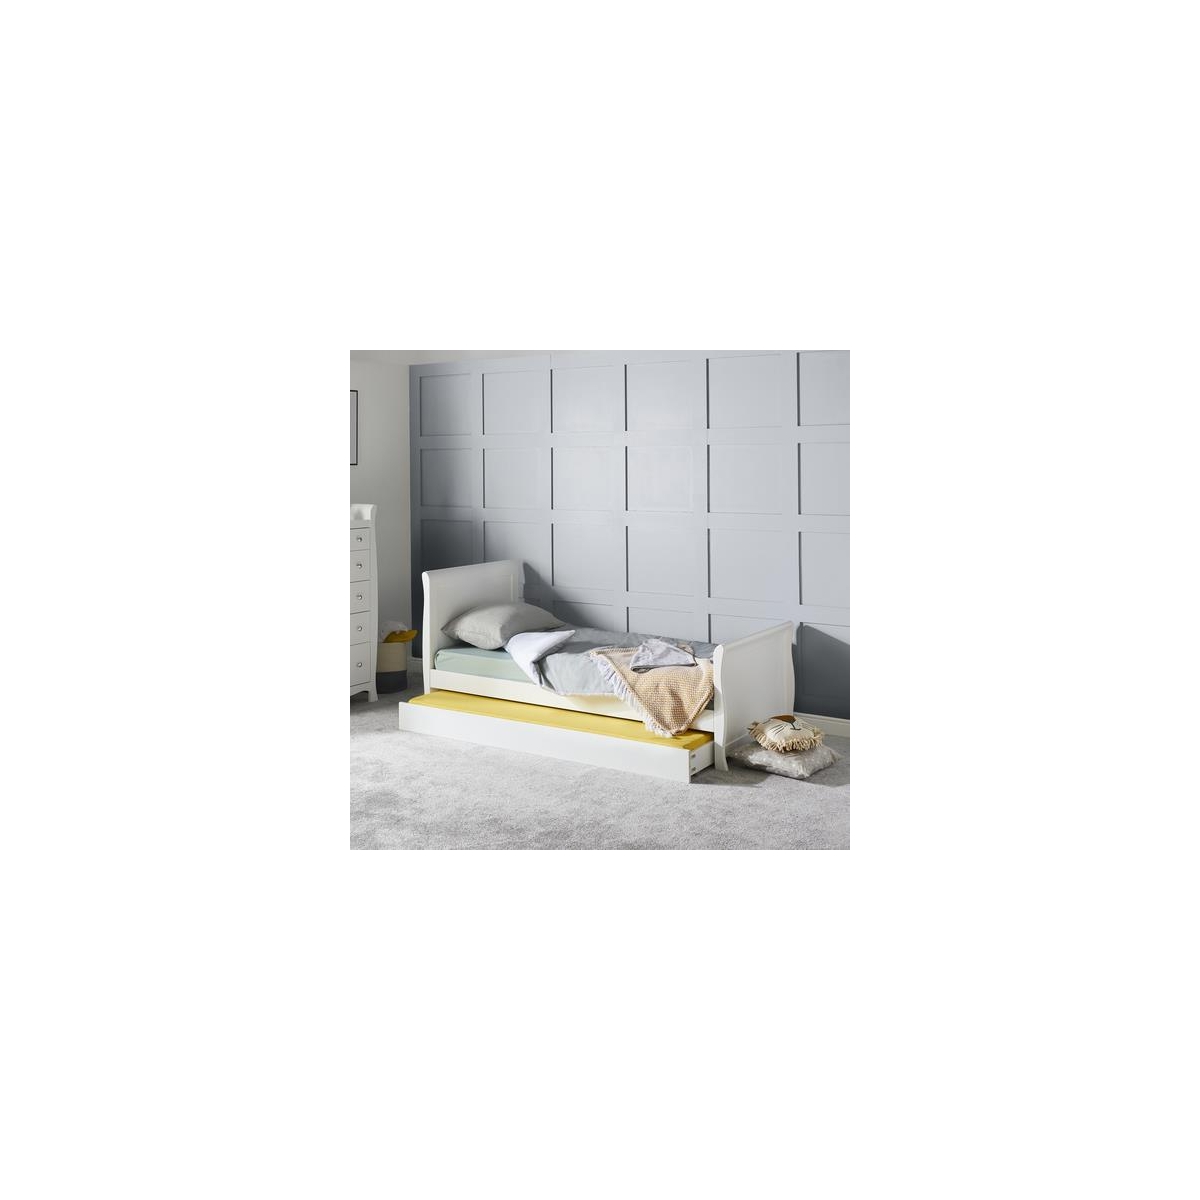 Ickle Bubba Snowdon Single Bed, Trundle and Trundle Mattress Bundle